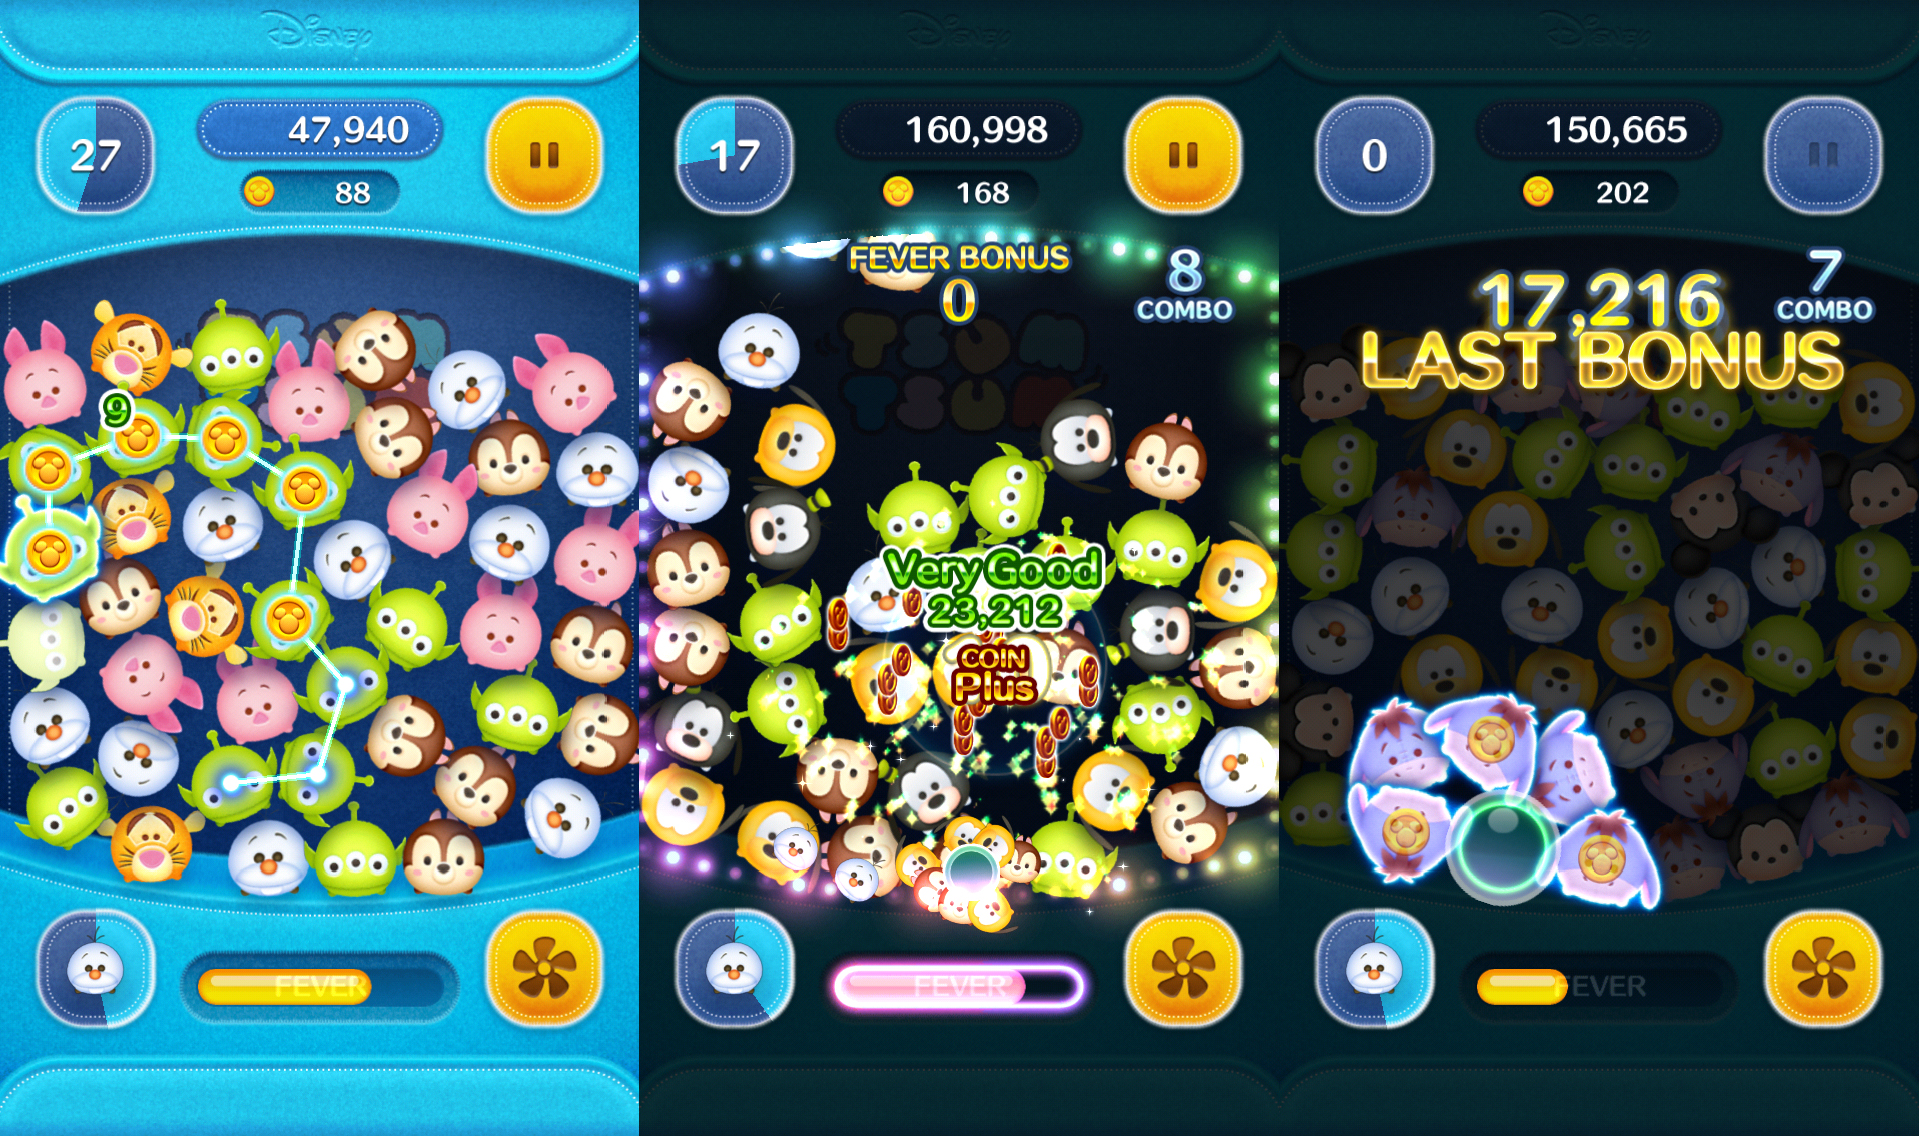 Tsum Tsum Is Cute, Fun And Painfully Addictive